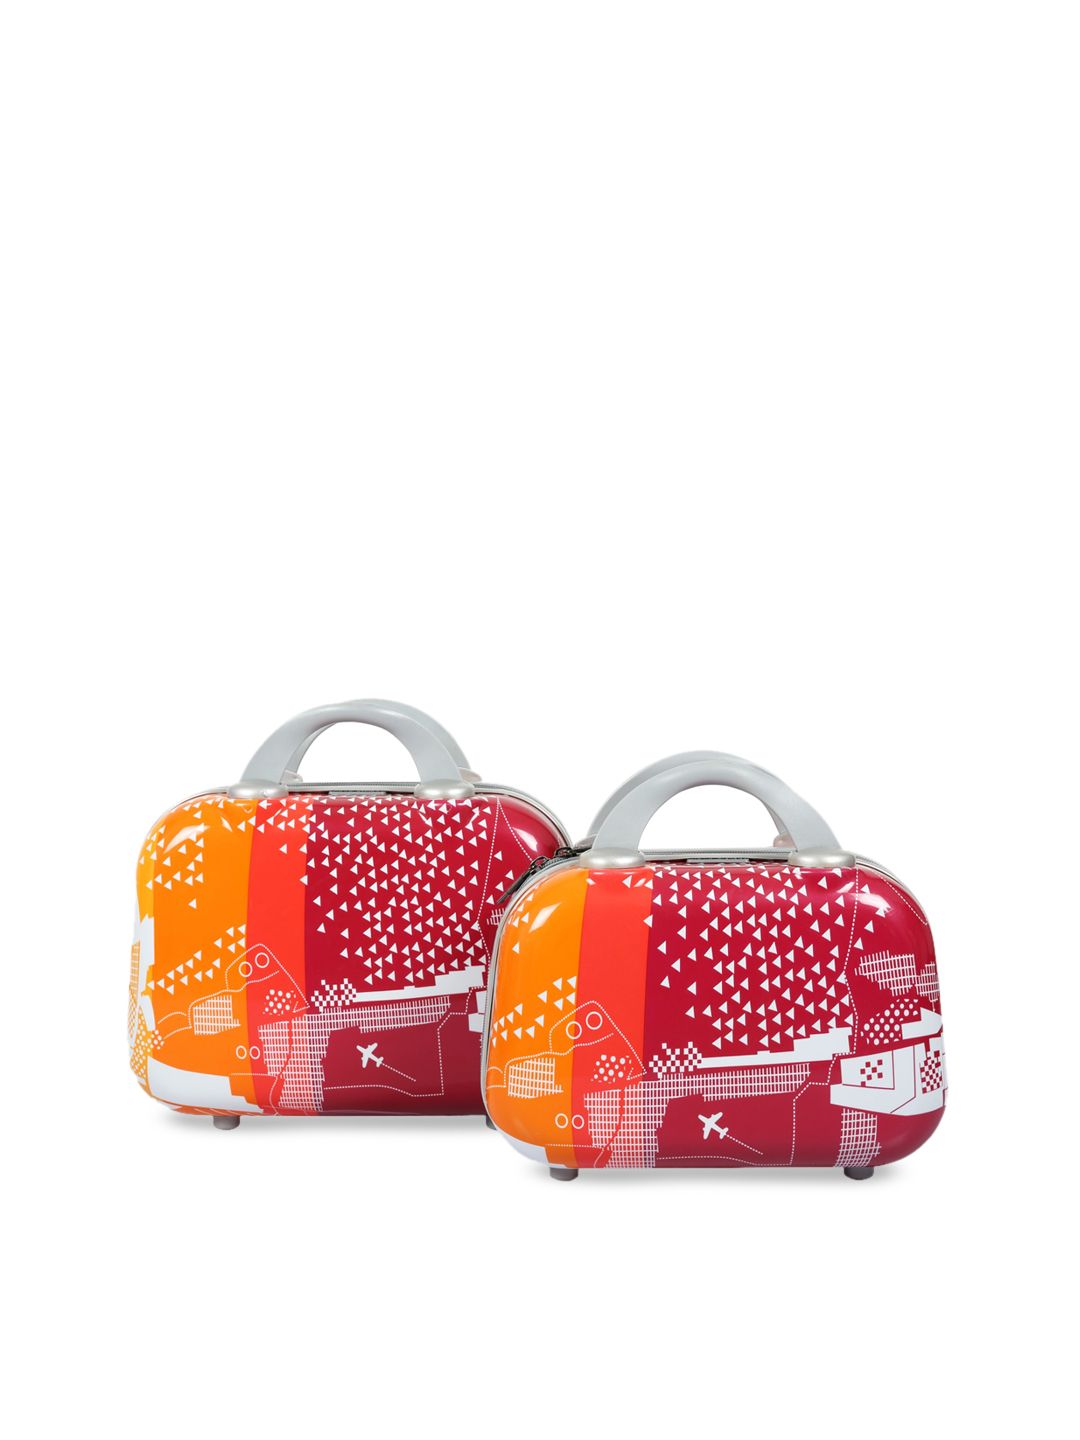 Polo Class Set Of 2 Red & Orange Printed Vanity Cabin Trolley Bags Price in India